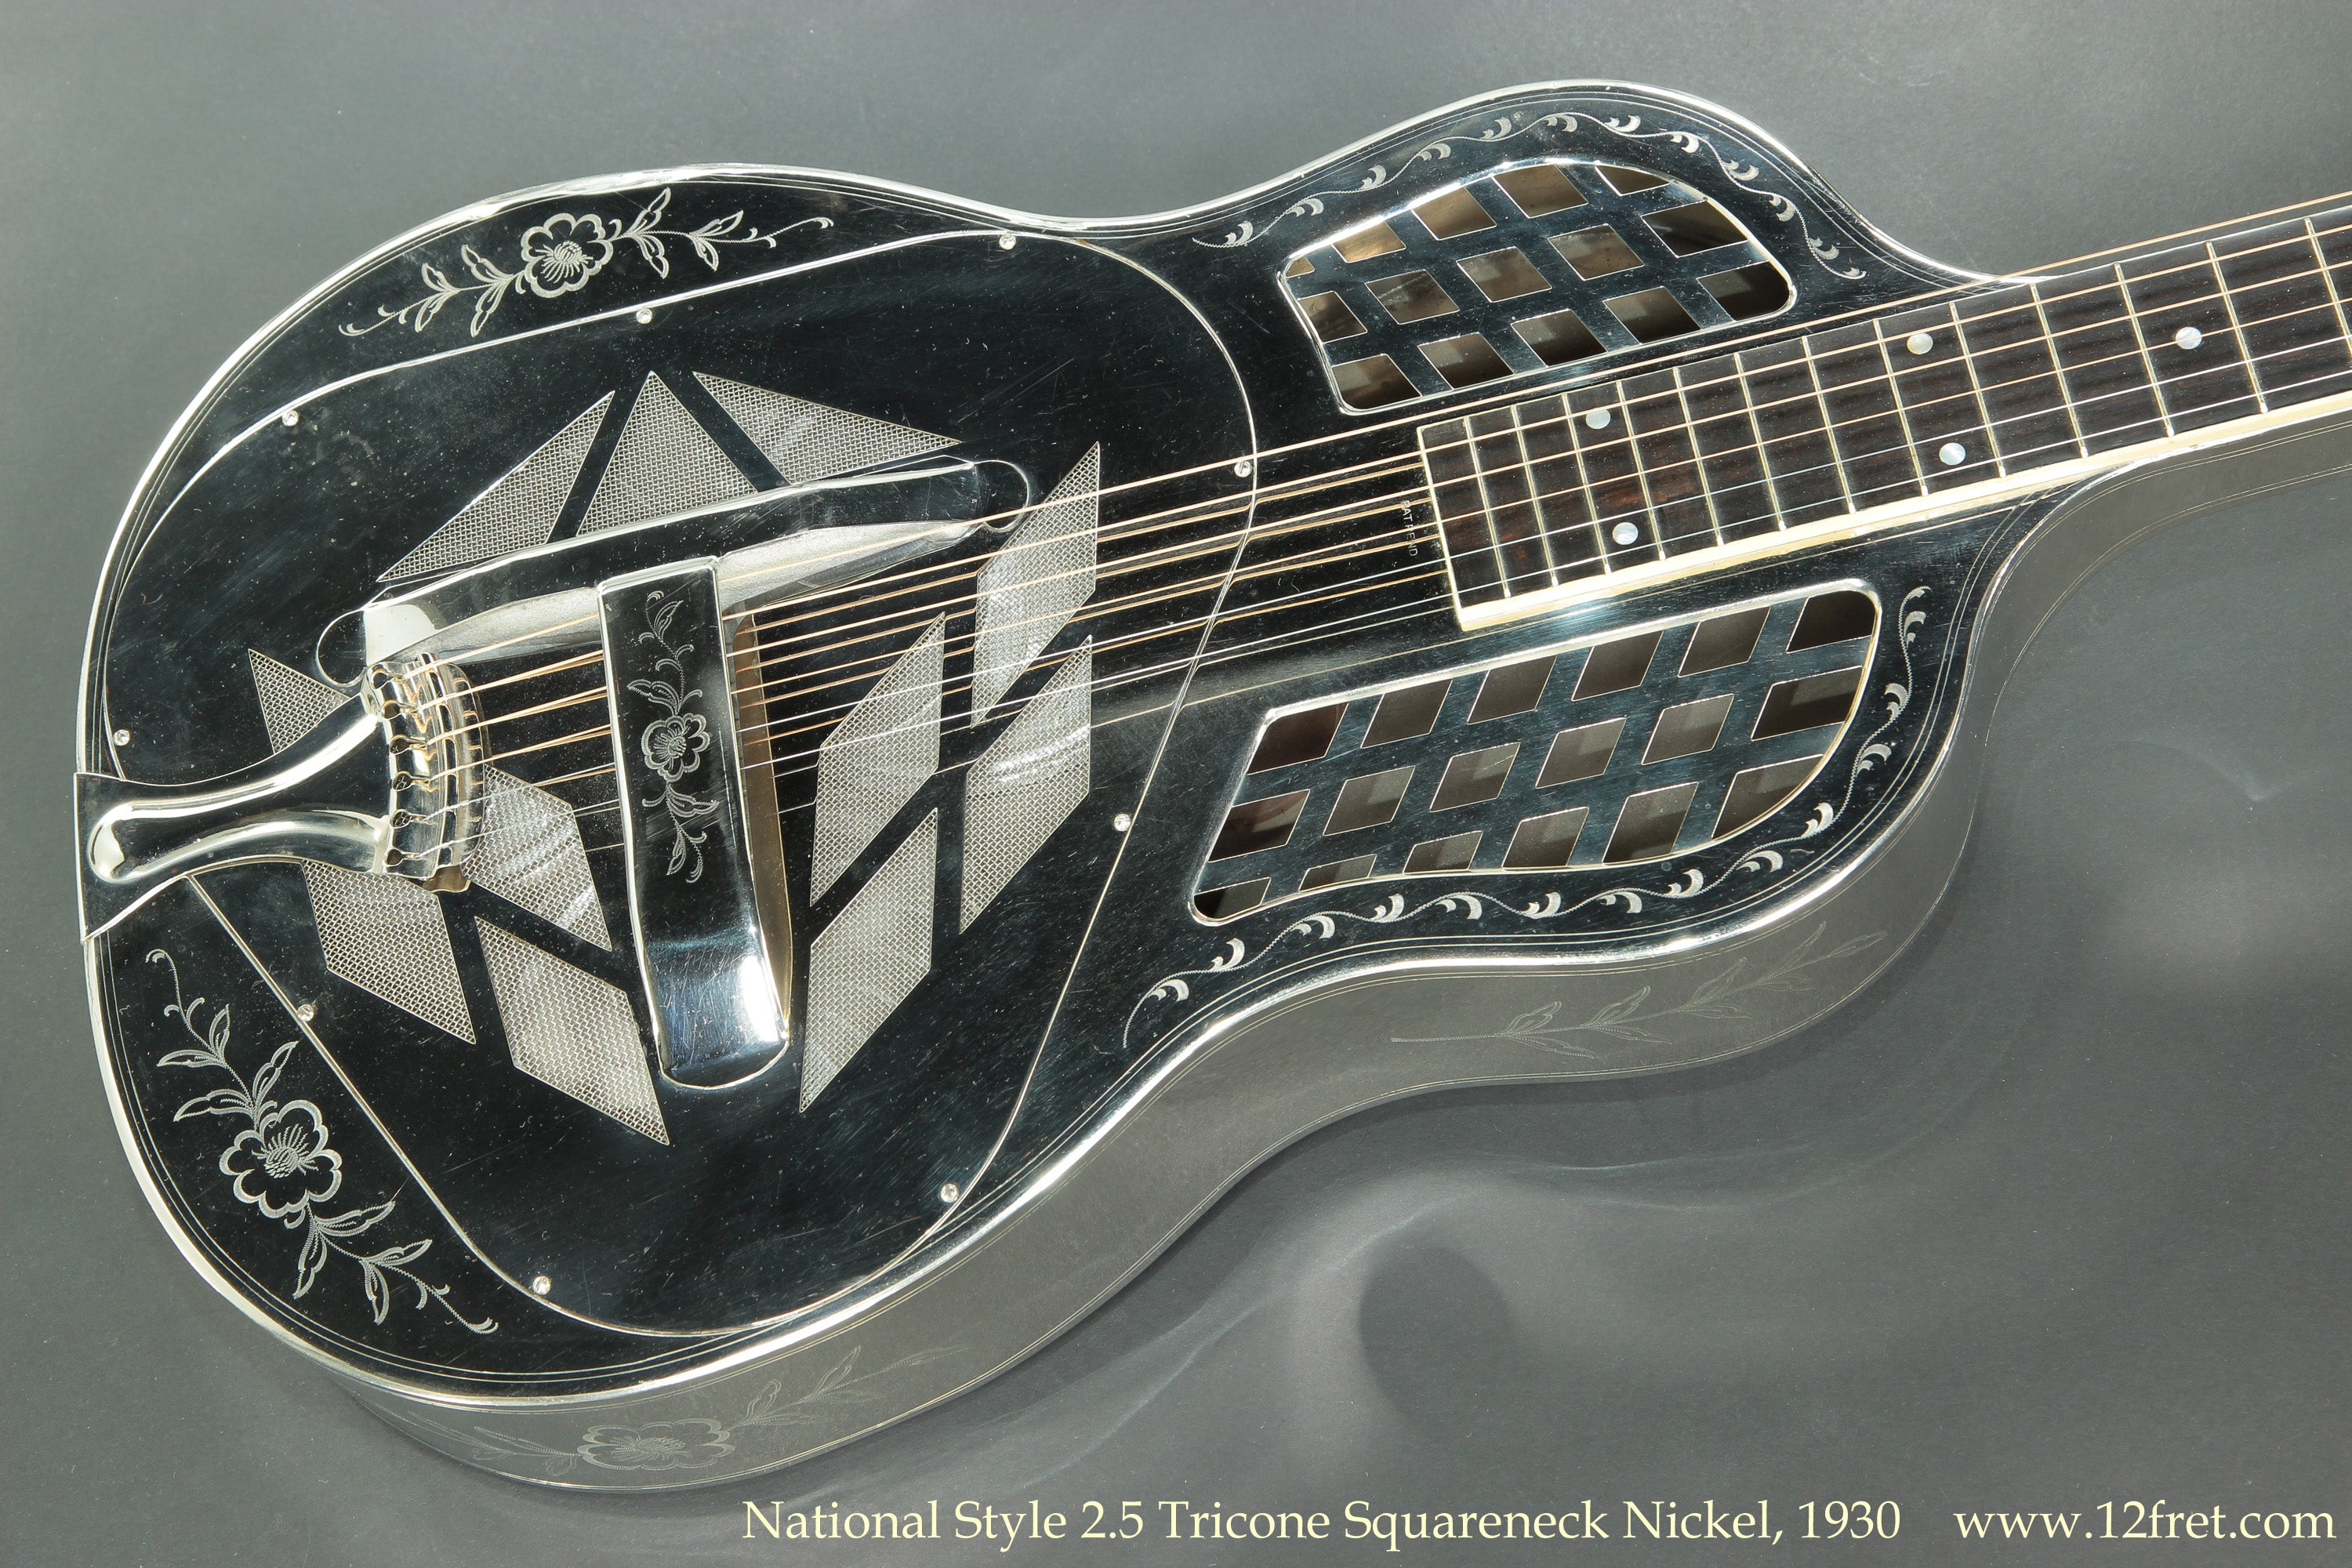 National Style 2.5 Tricone Squareneck Resophonic Guitar, Nickel, 1930 - The Twelfth Fret